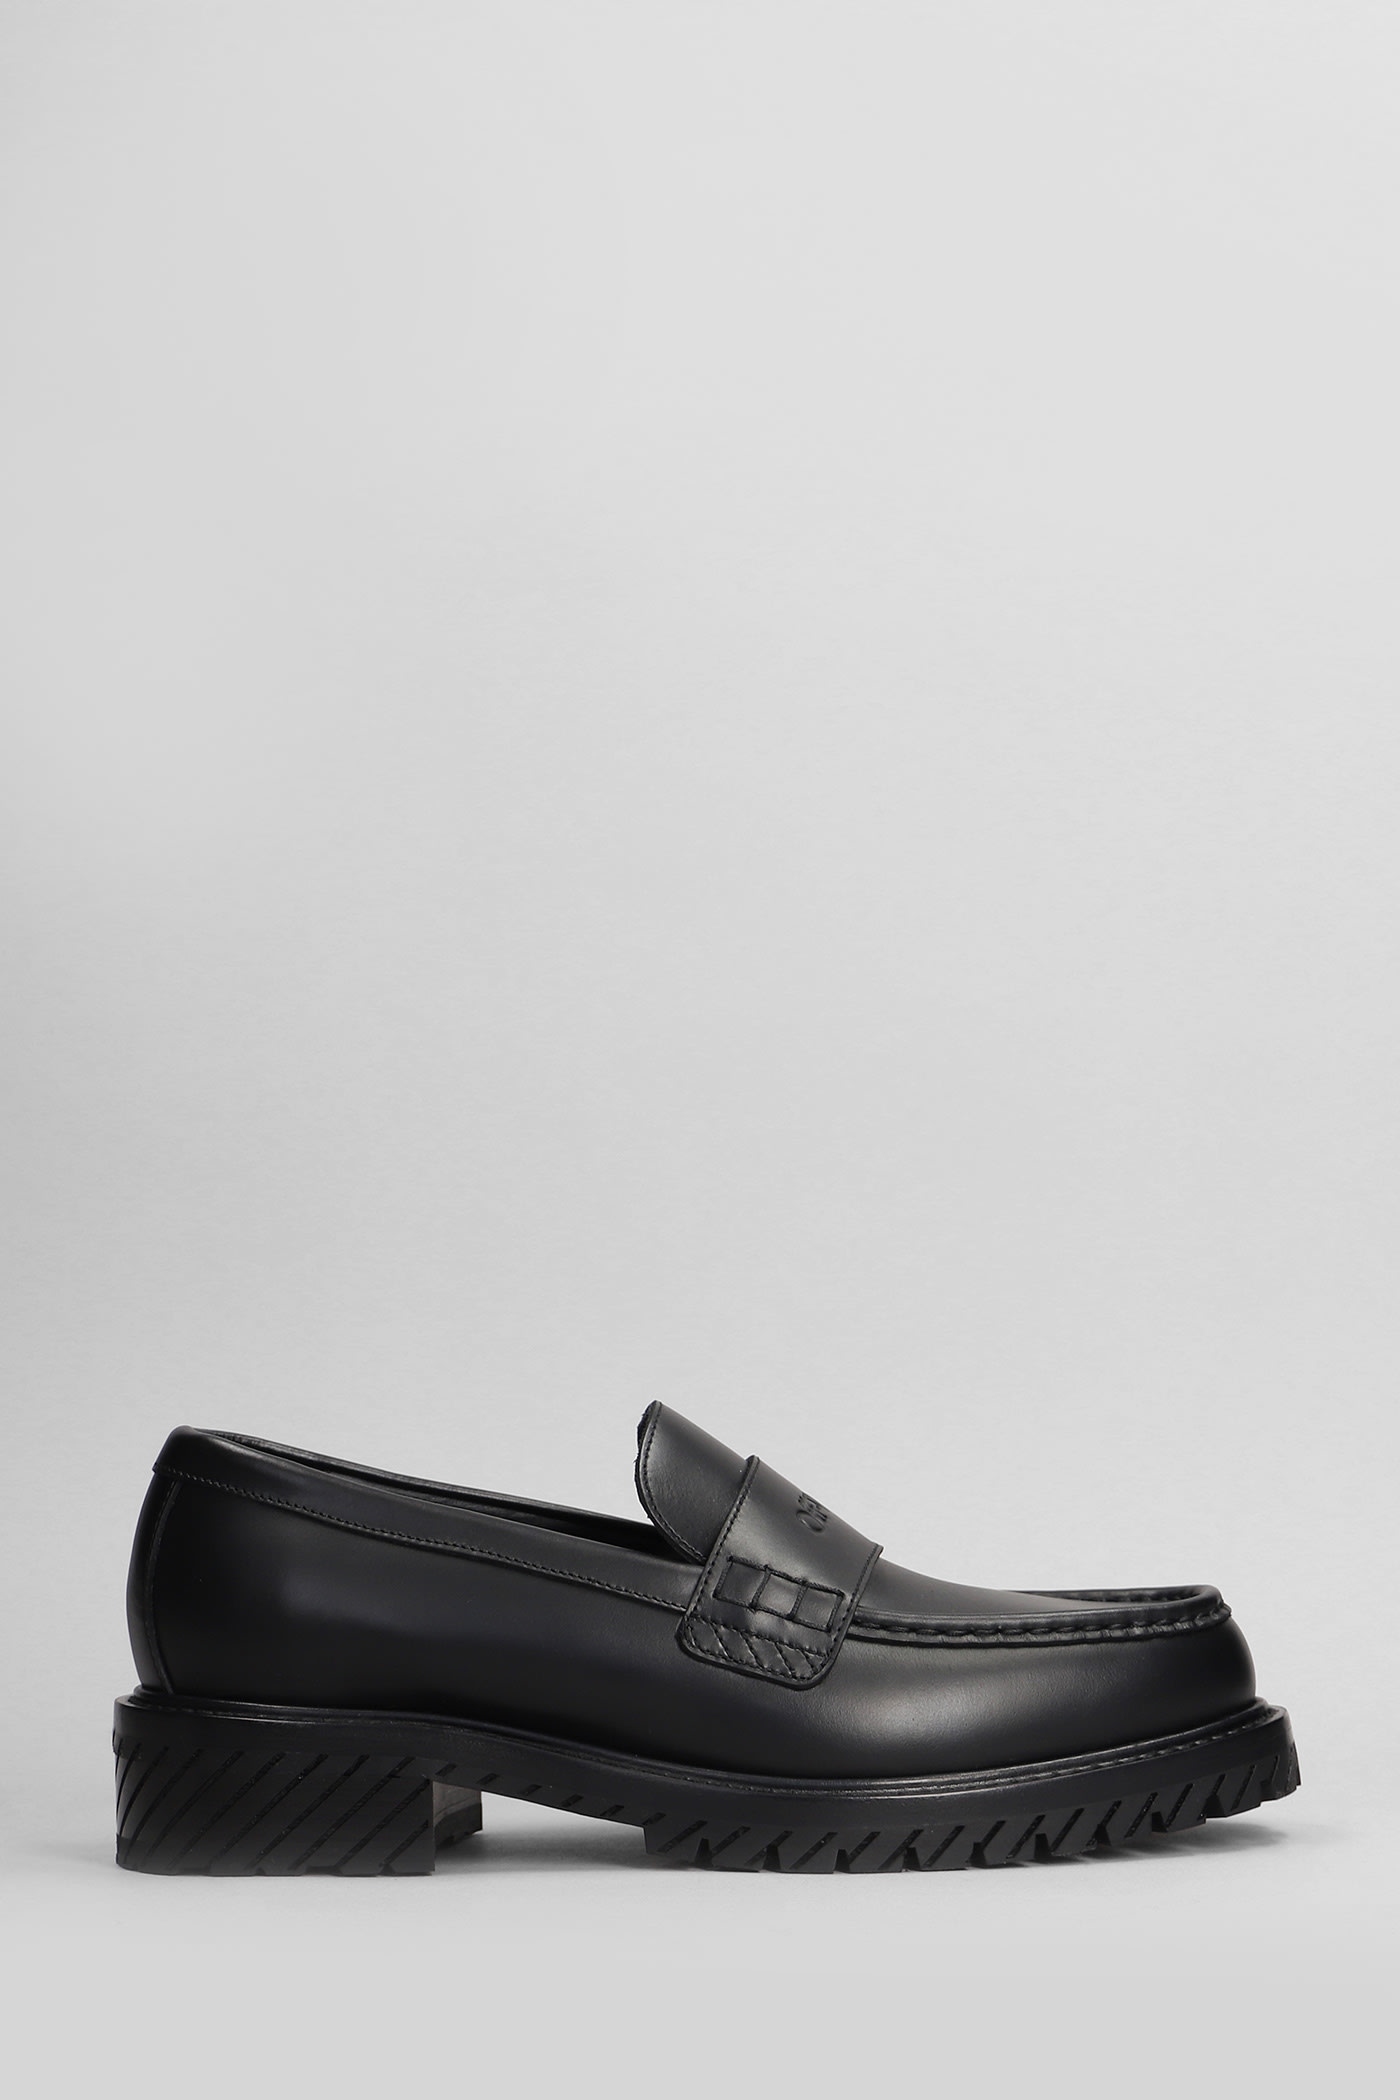 Military Loafer Loafers In Black Leather